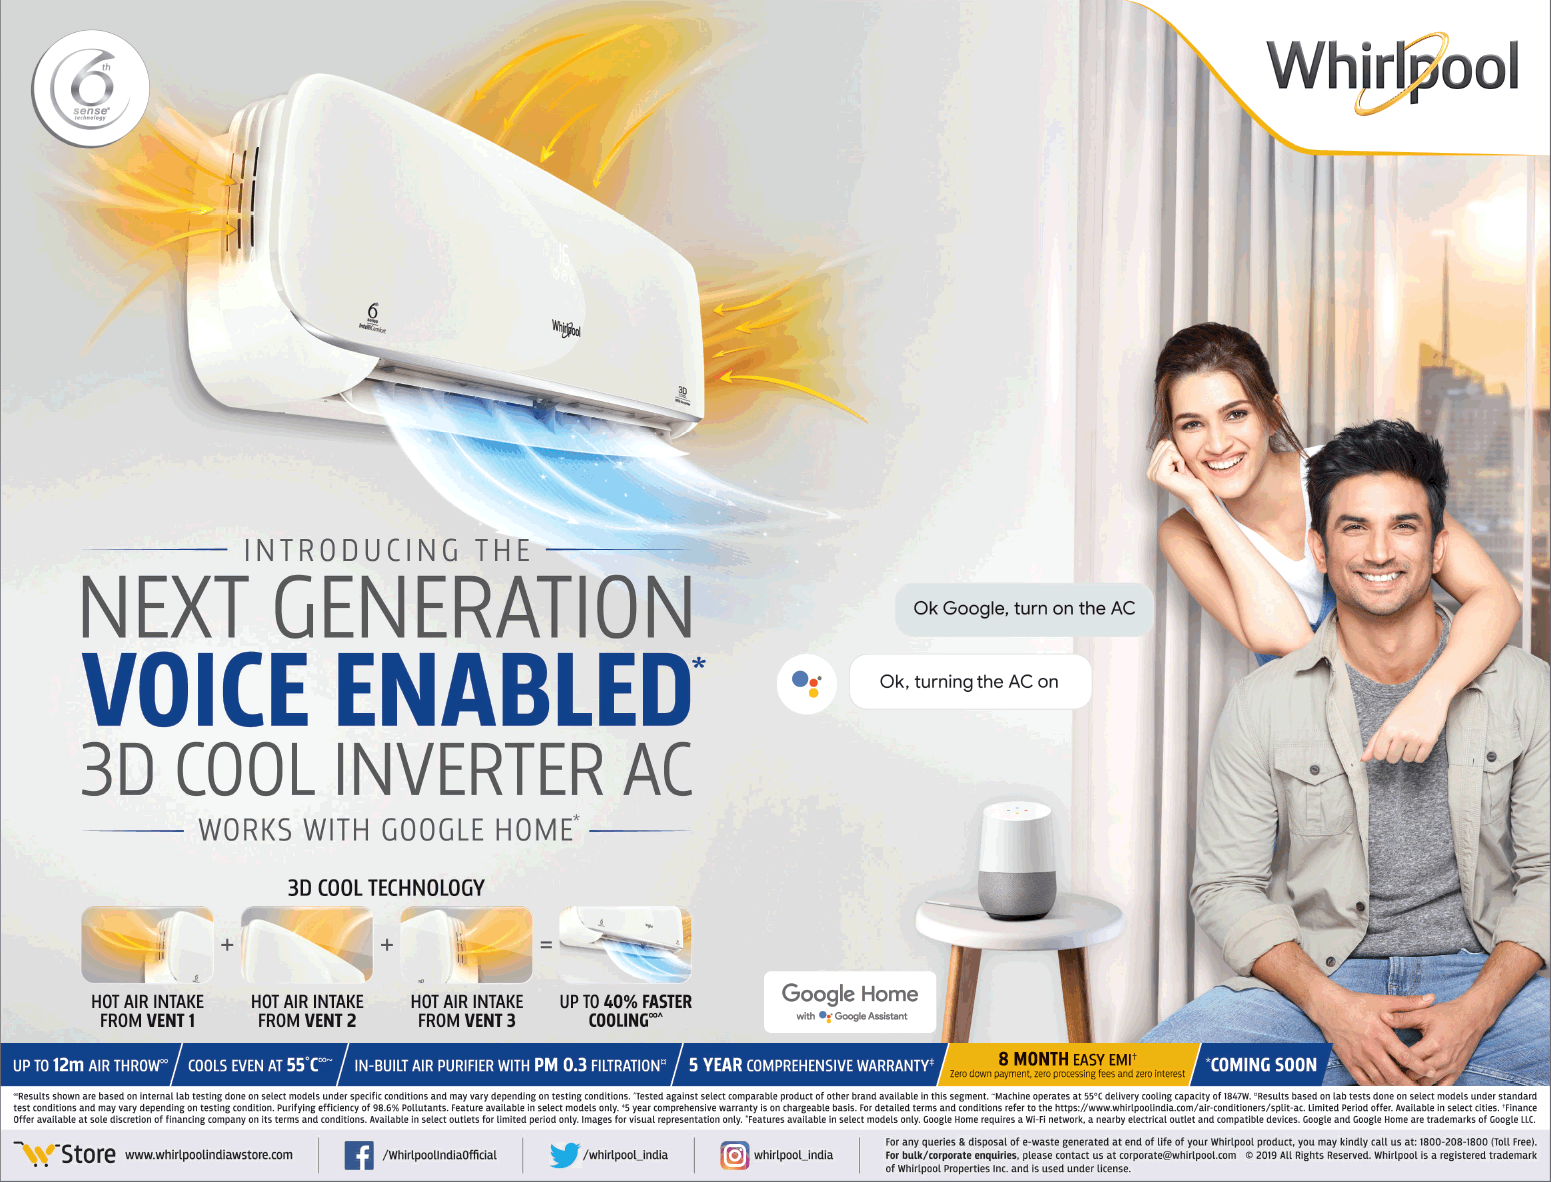 whirlpool-introducing-the-next-generation-voice-enabled-3d-cool-inverter-ac-ad-times-of-india-delhi-07-04-2019.png